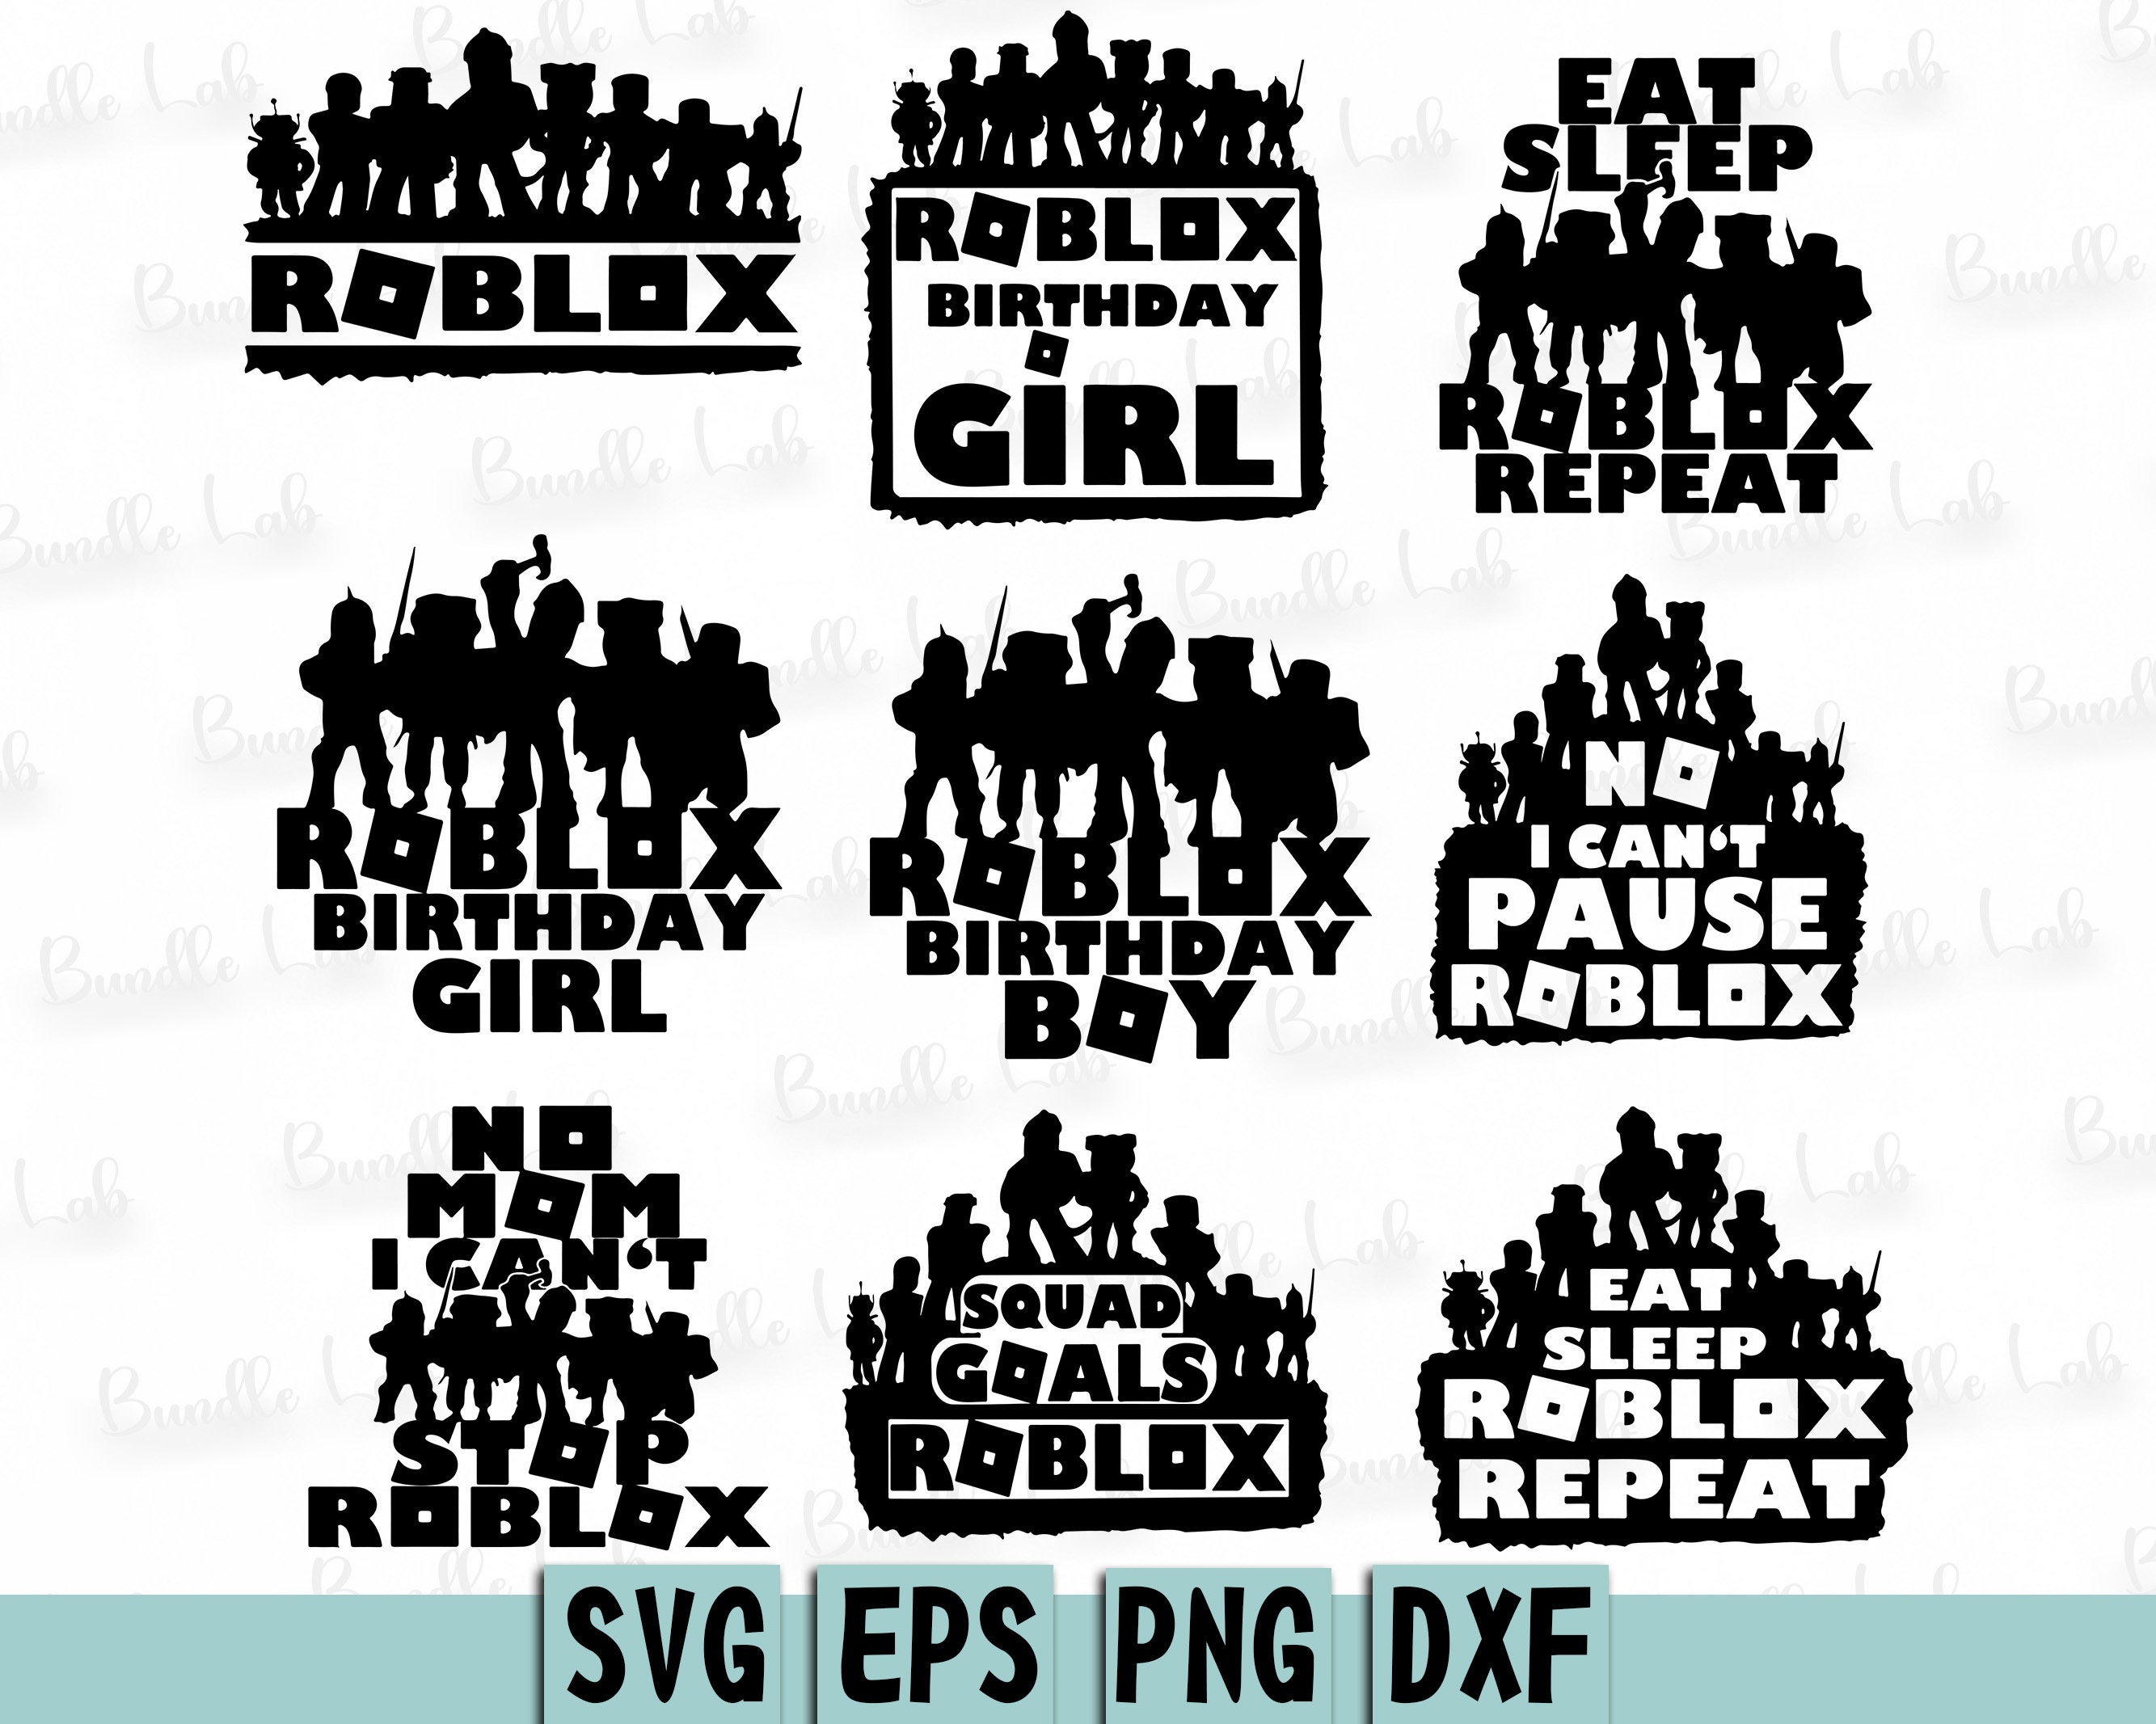 Rather Be Playing Roblox Design Files Digital Downloads SVG 